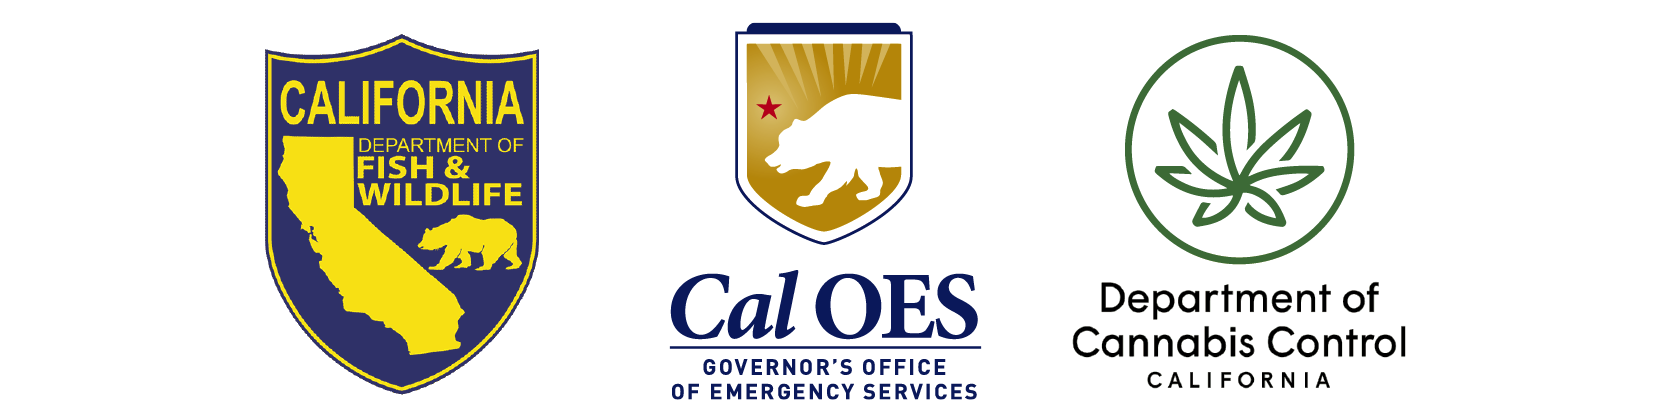 Image of three logos of California Department of Fish and Wildlife, Cal OES and Department of Cannabis Control